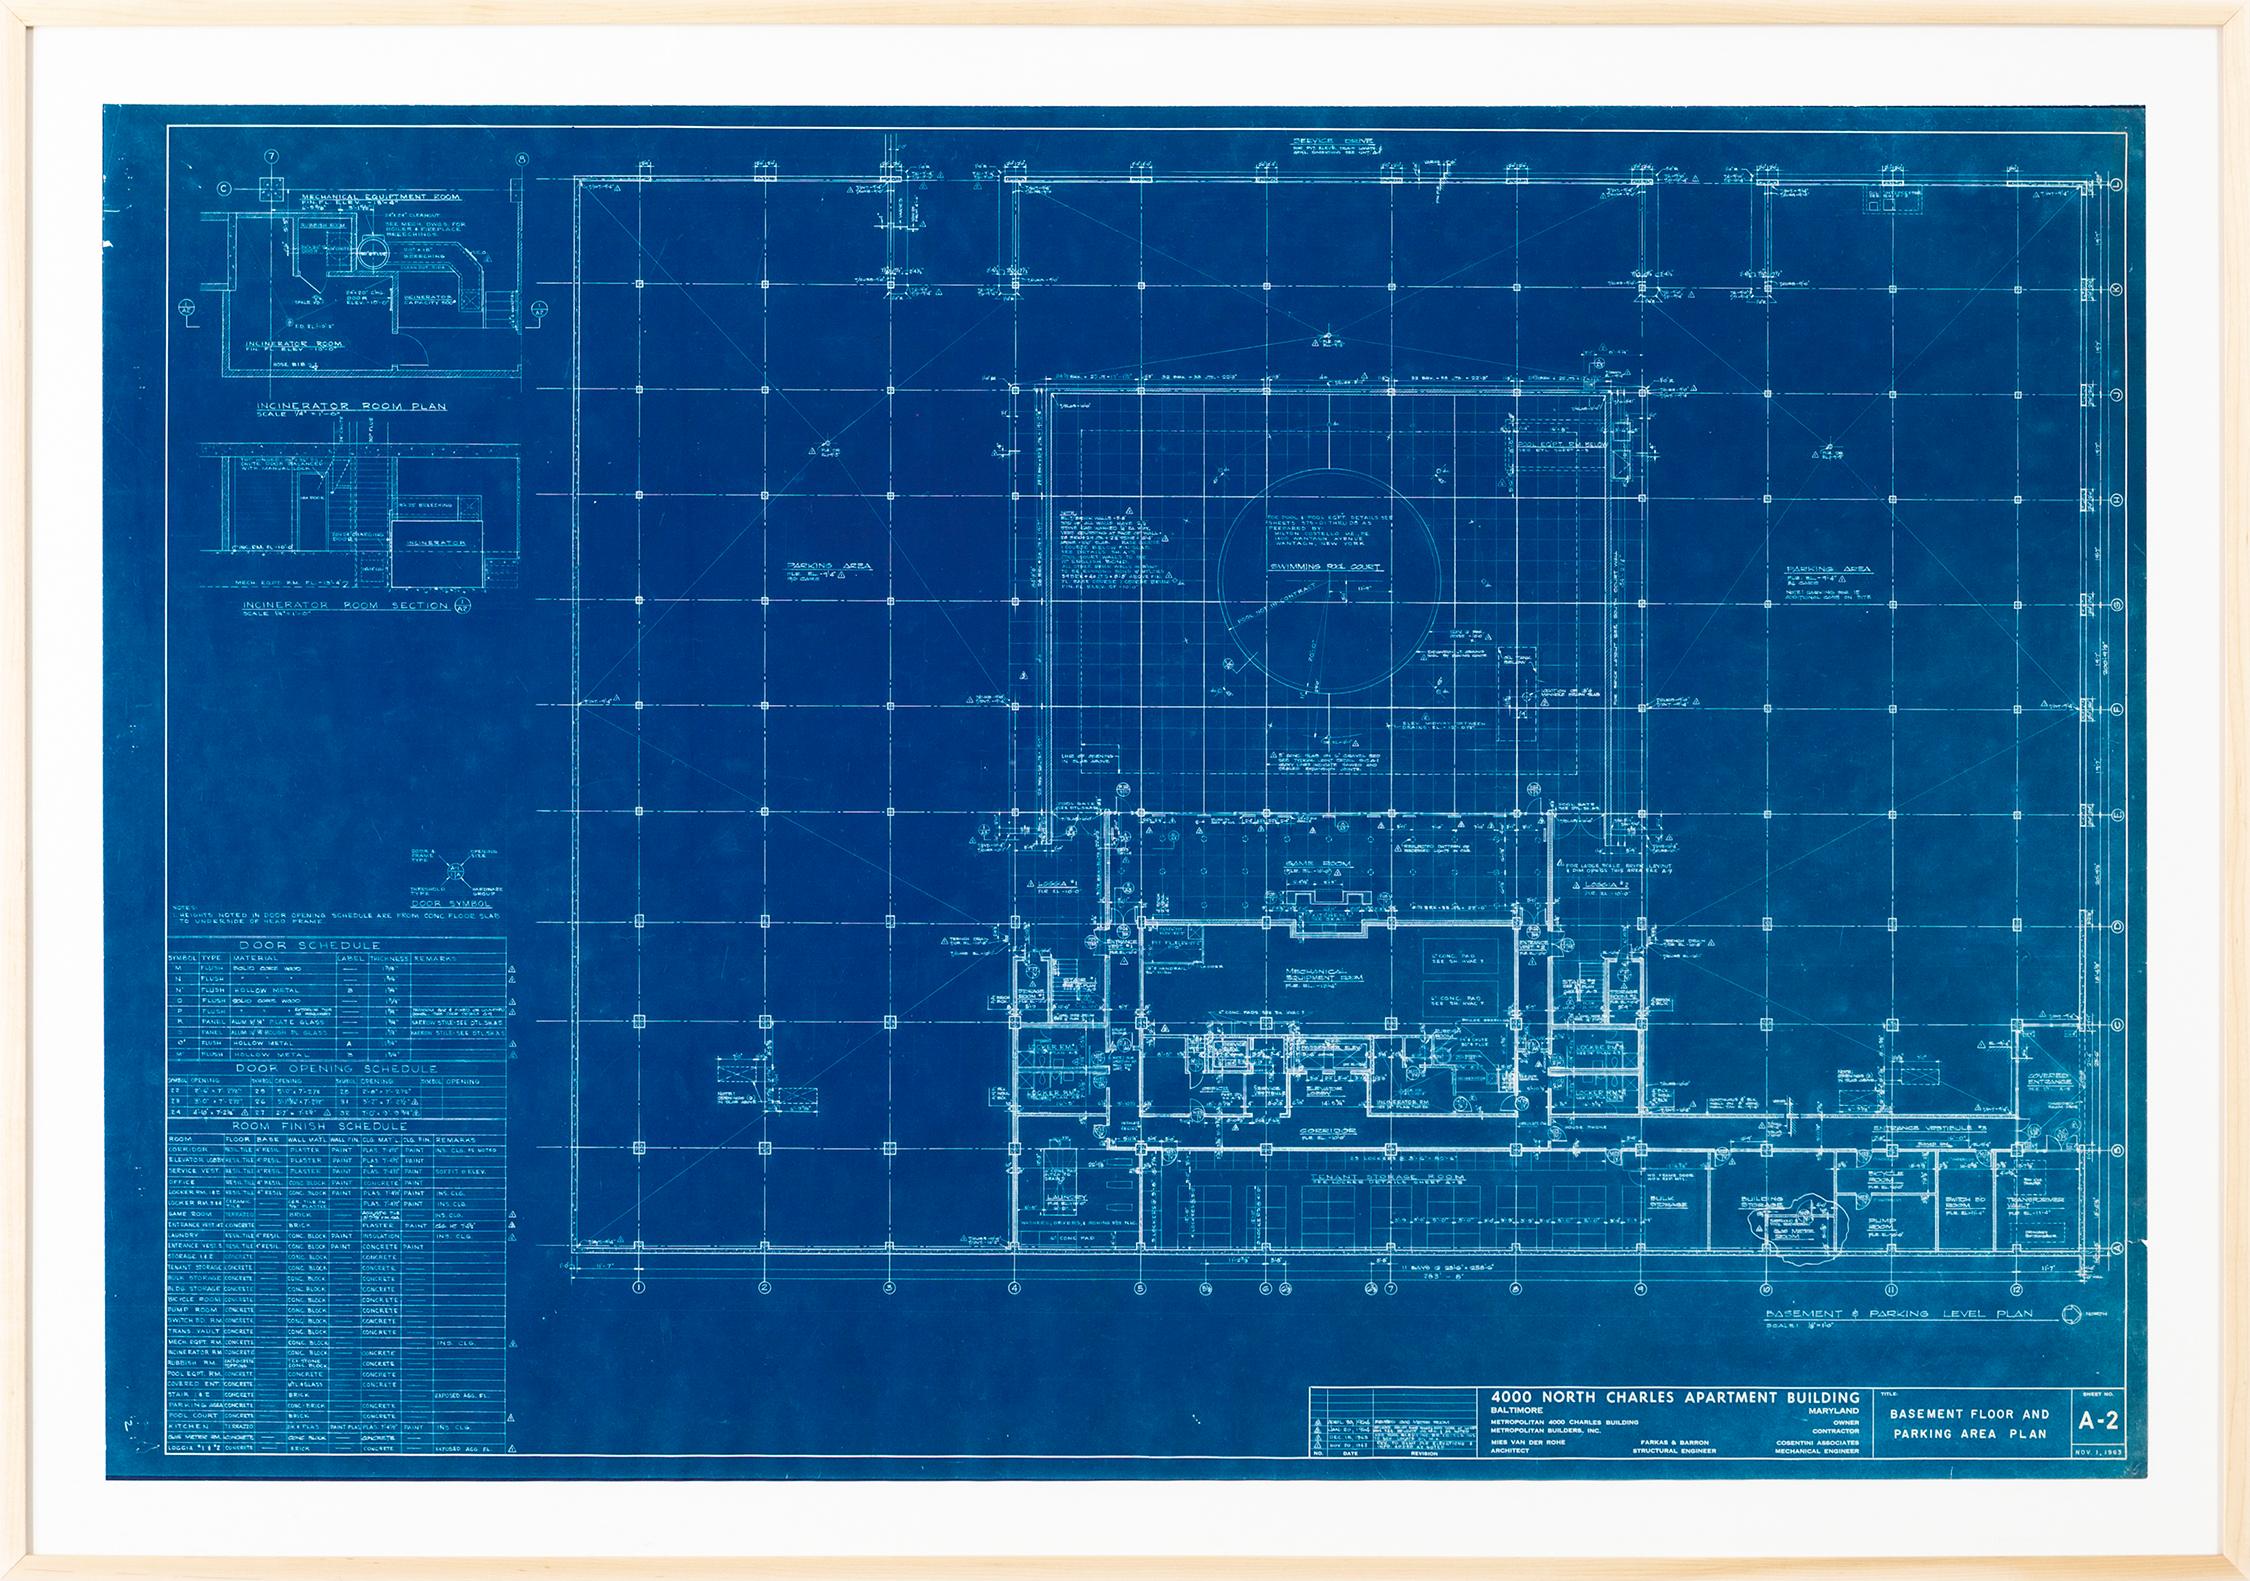 Blueprint from the office of Ludwig Mies van der Rohe, Chicago 1964

4000 North Charles, Highfield House Condominium Building, Baltimore, MD 

A-2: Basement Floor and Parking Area Plan 

Ludwig Mies van der Rohe

This is one of a collection